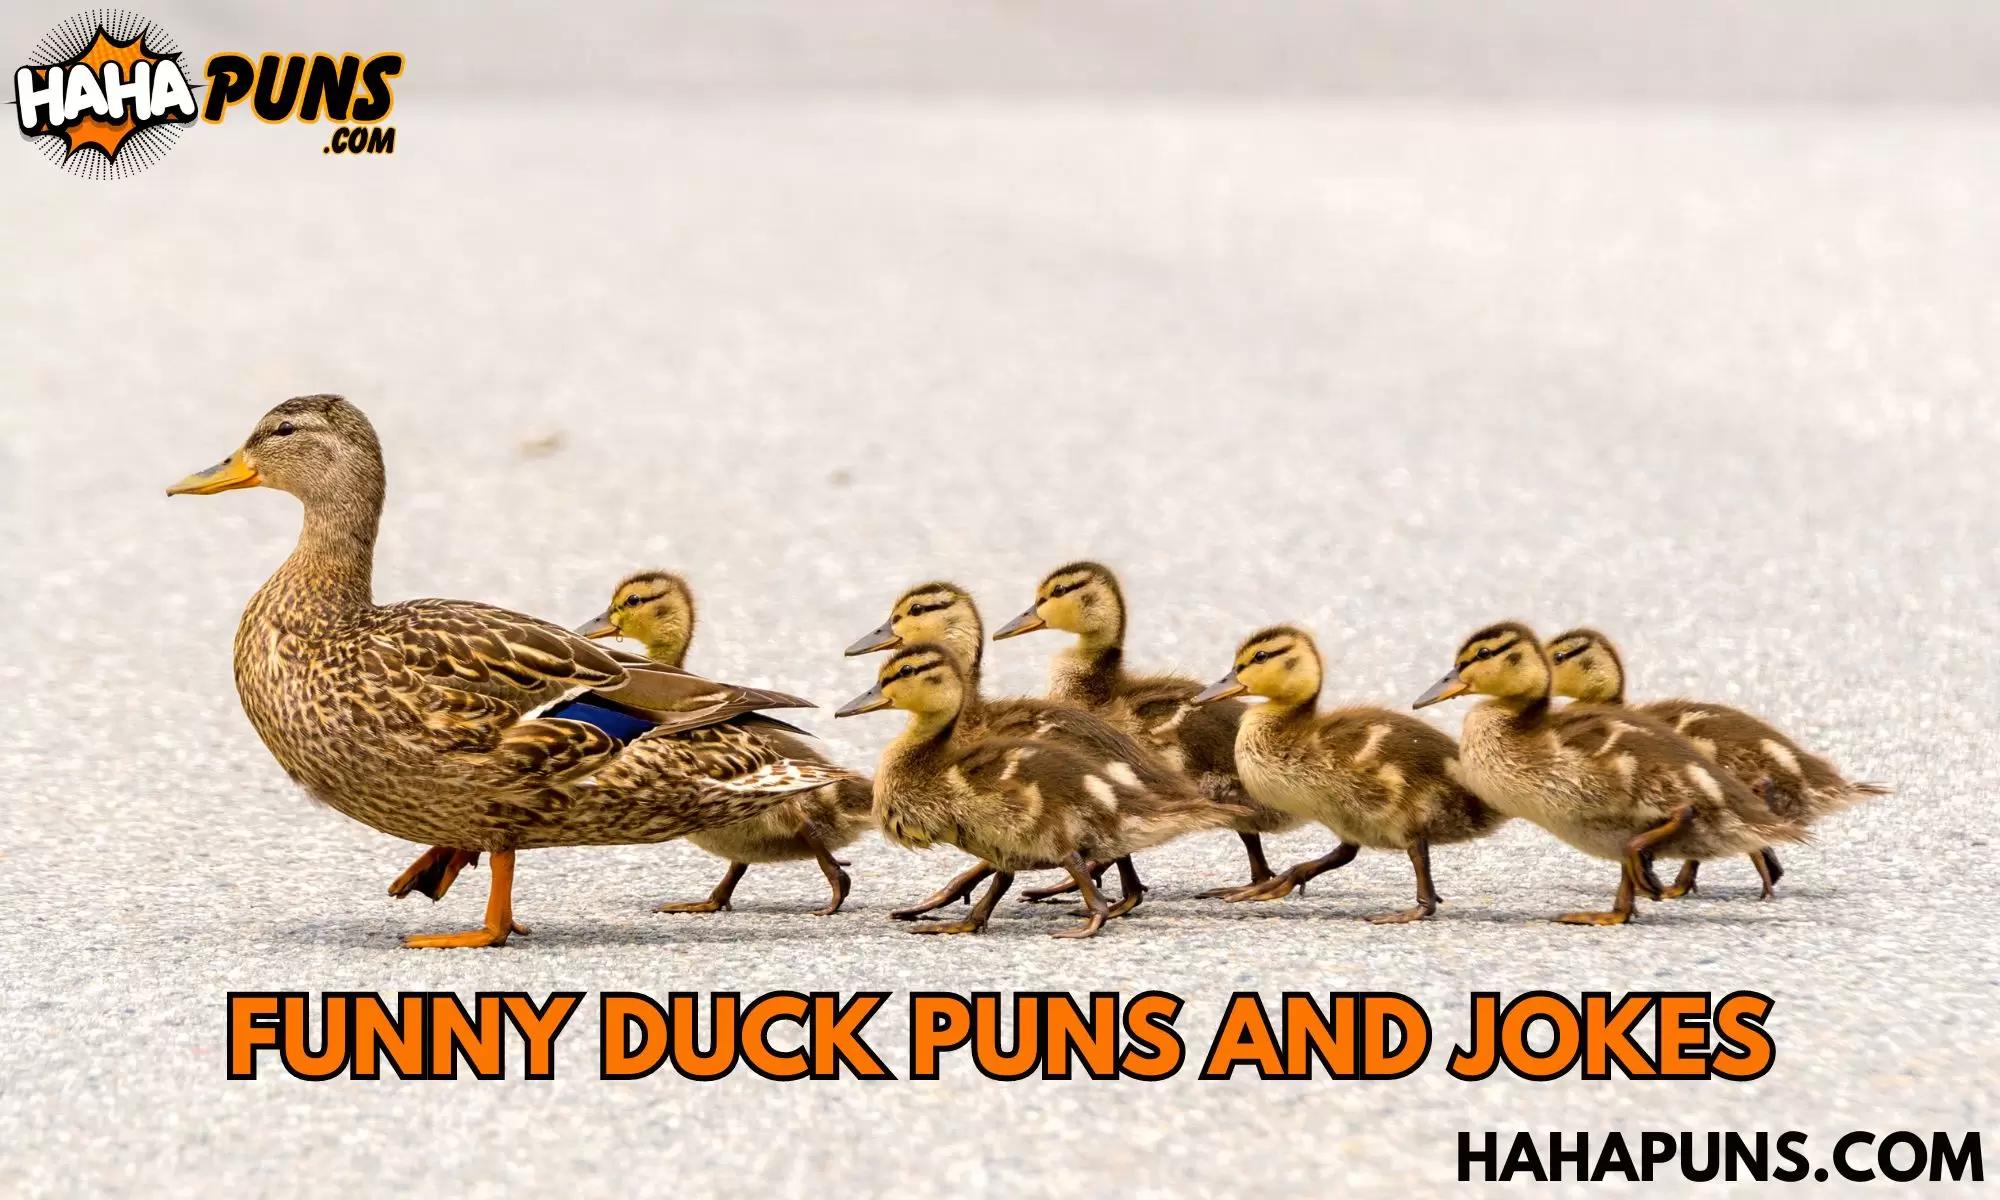 Funny Duck Puns and Jokes